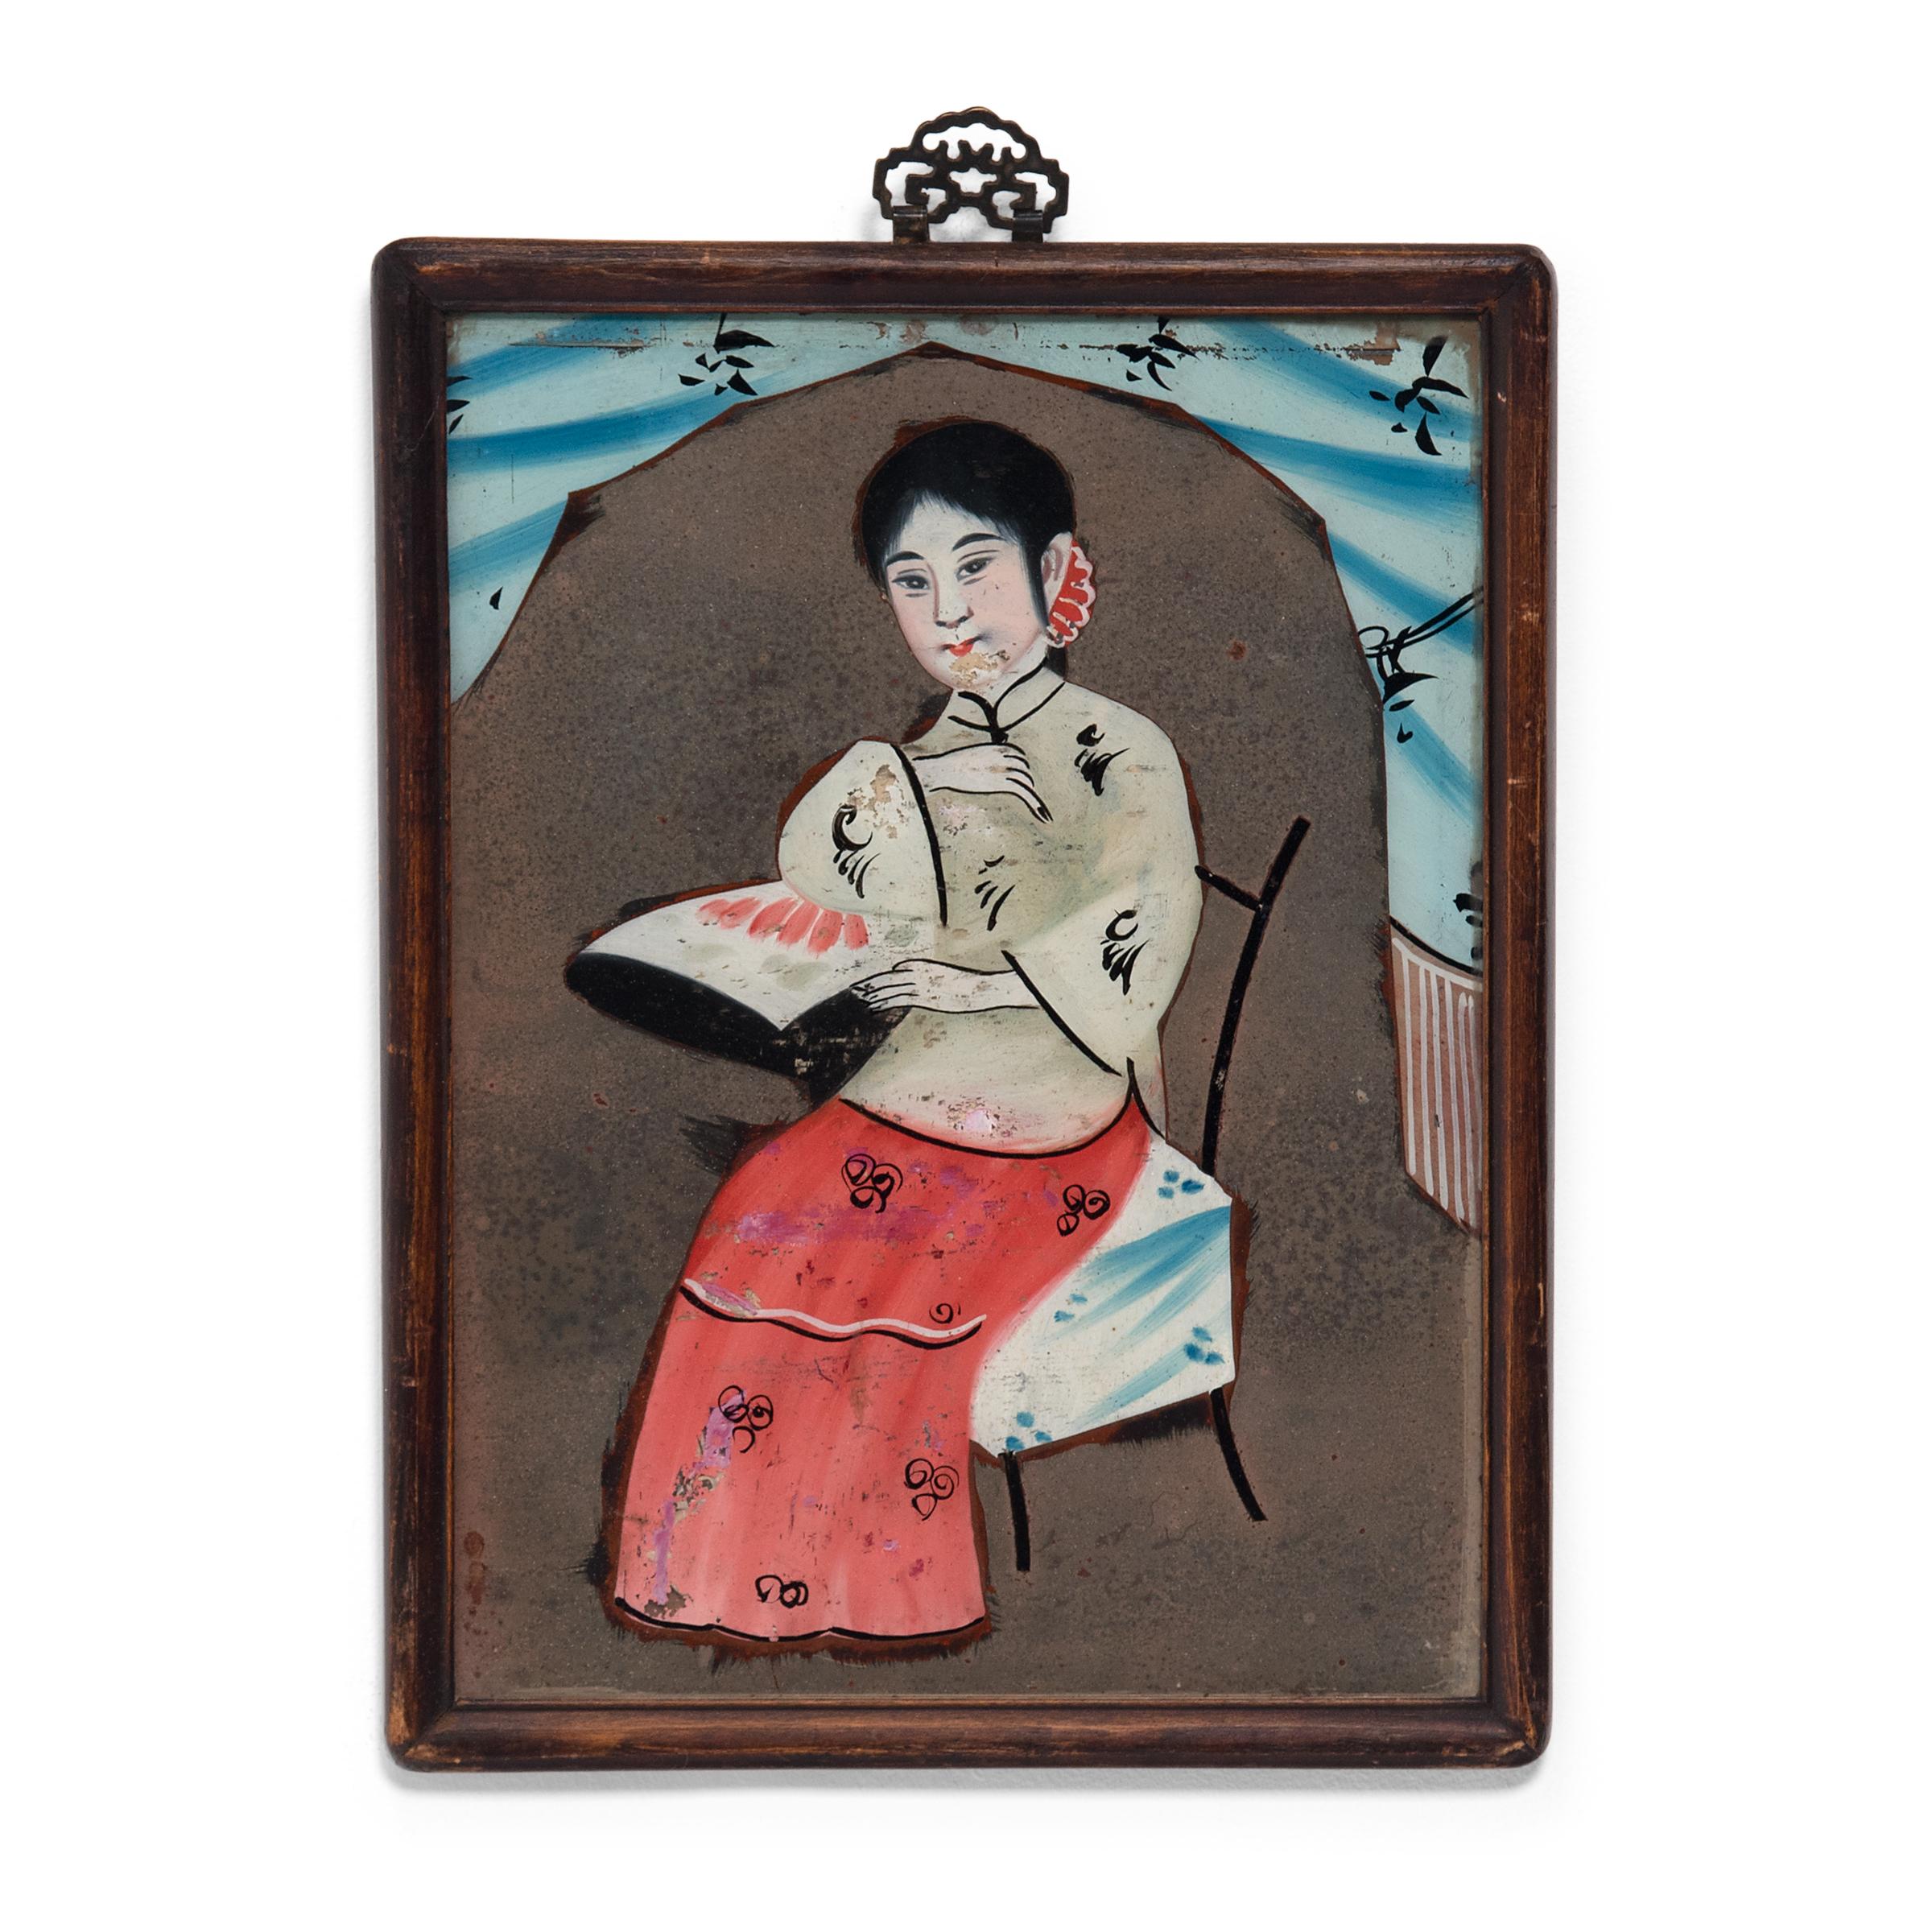 Painted Set of Five Chinese Reverse Glass Portraits, c. 1900